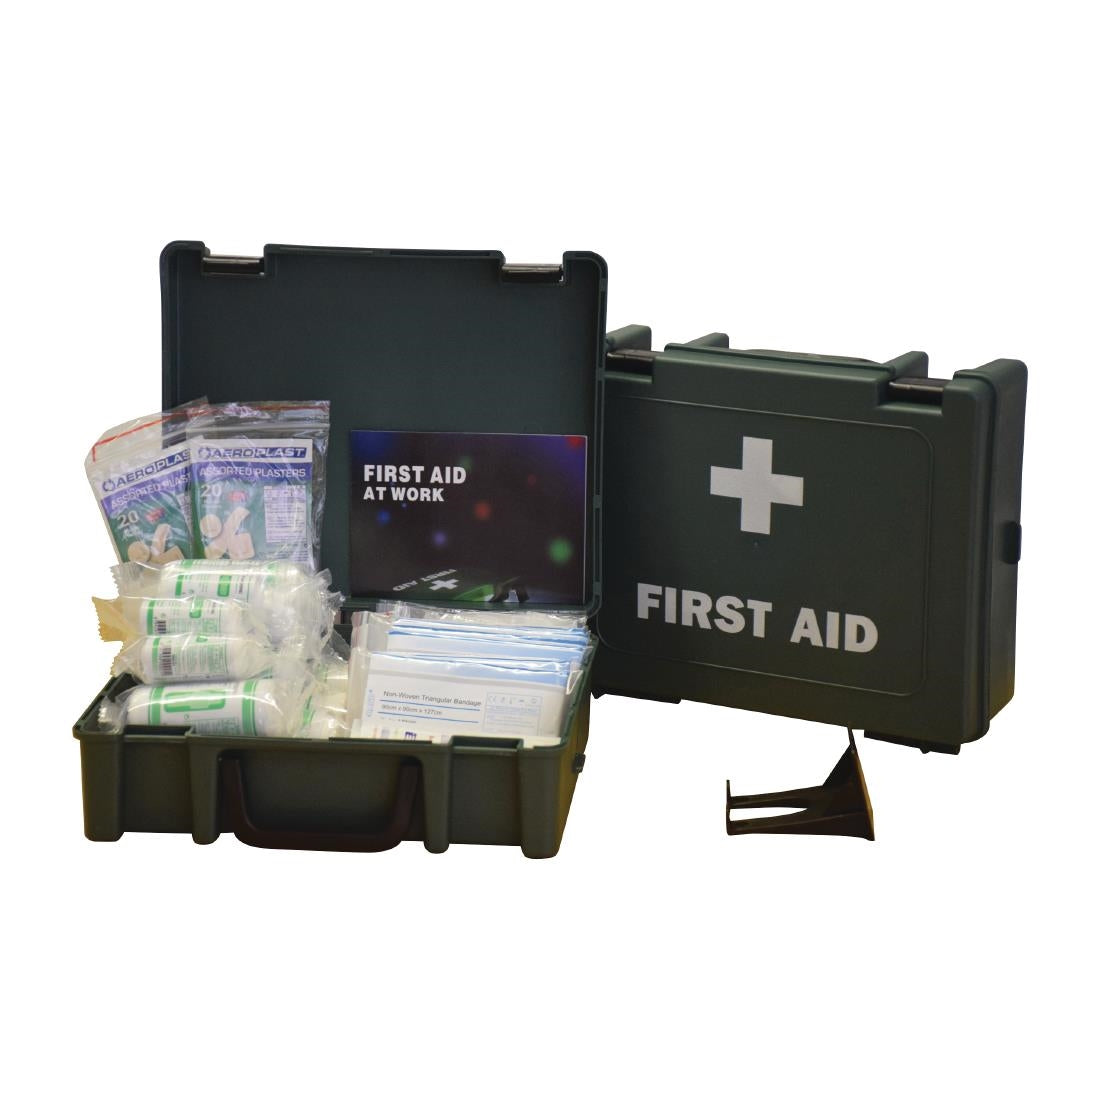 FT596 AeroKit HSE 20 Person First Aid Kit JD Catering Equipment Solutions Ltd